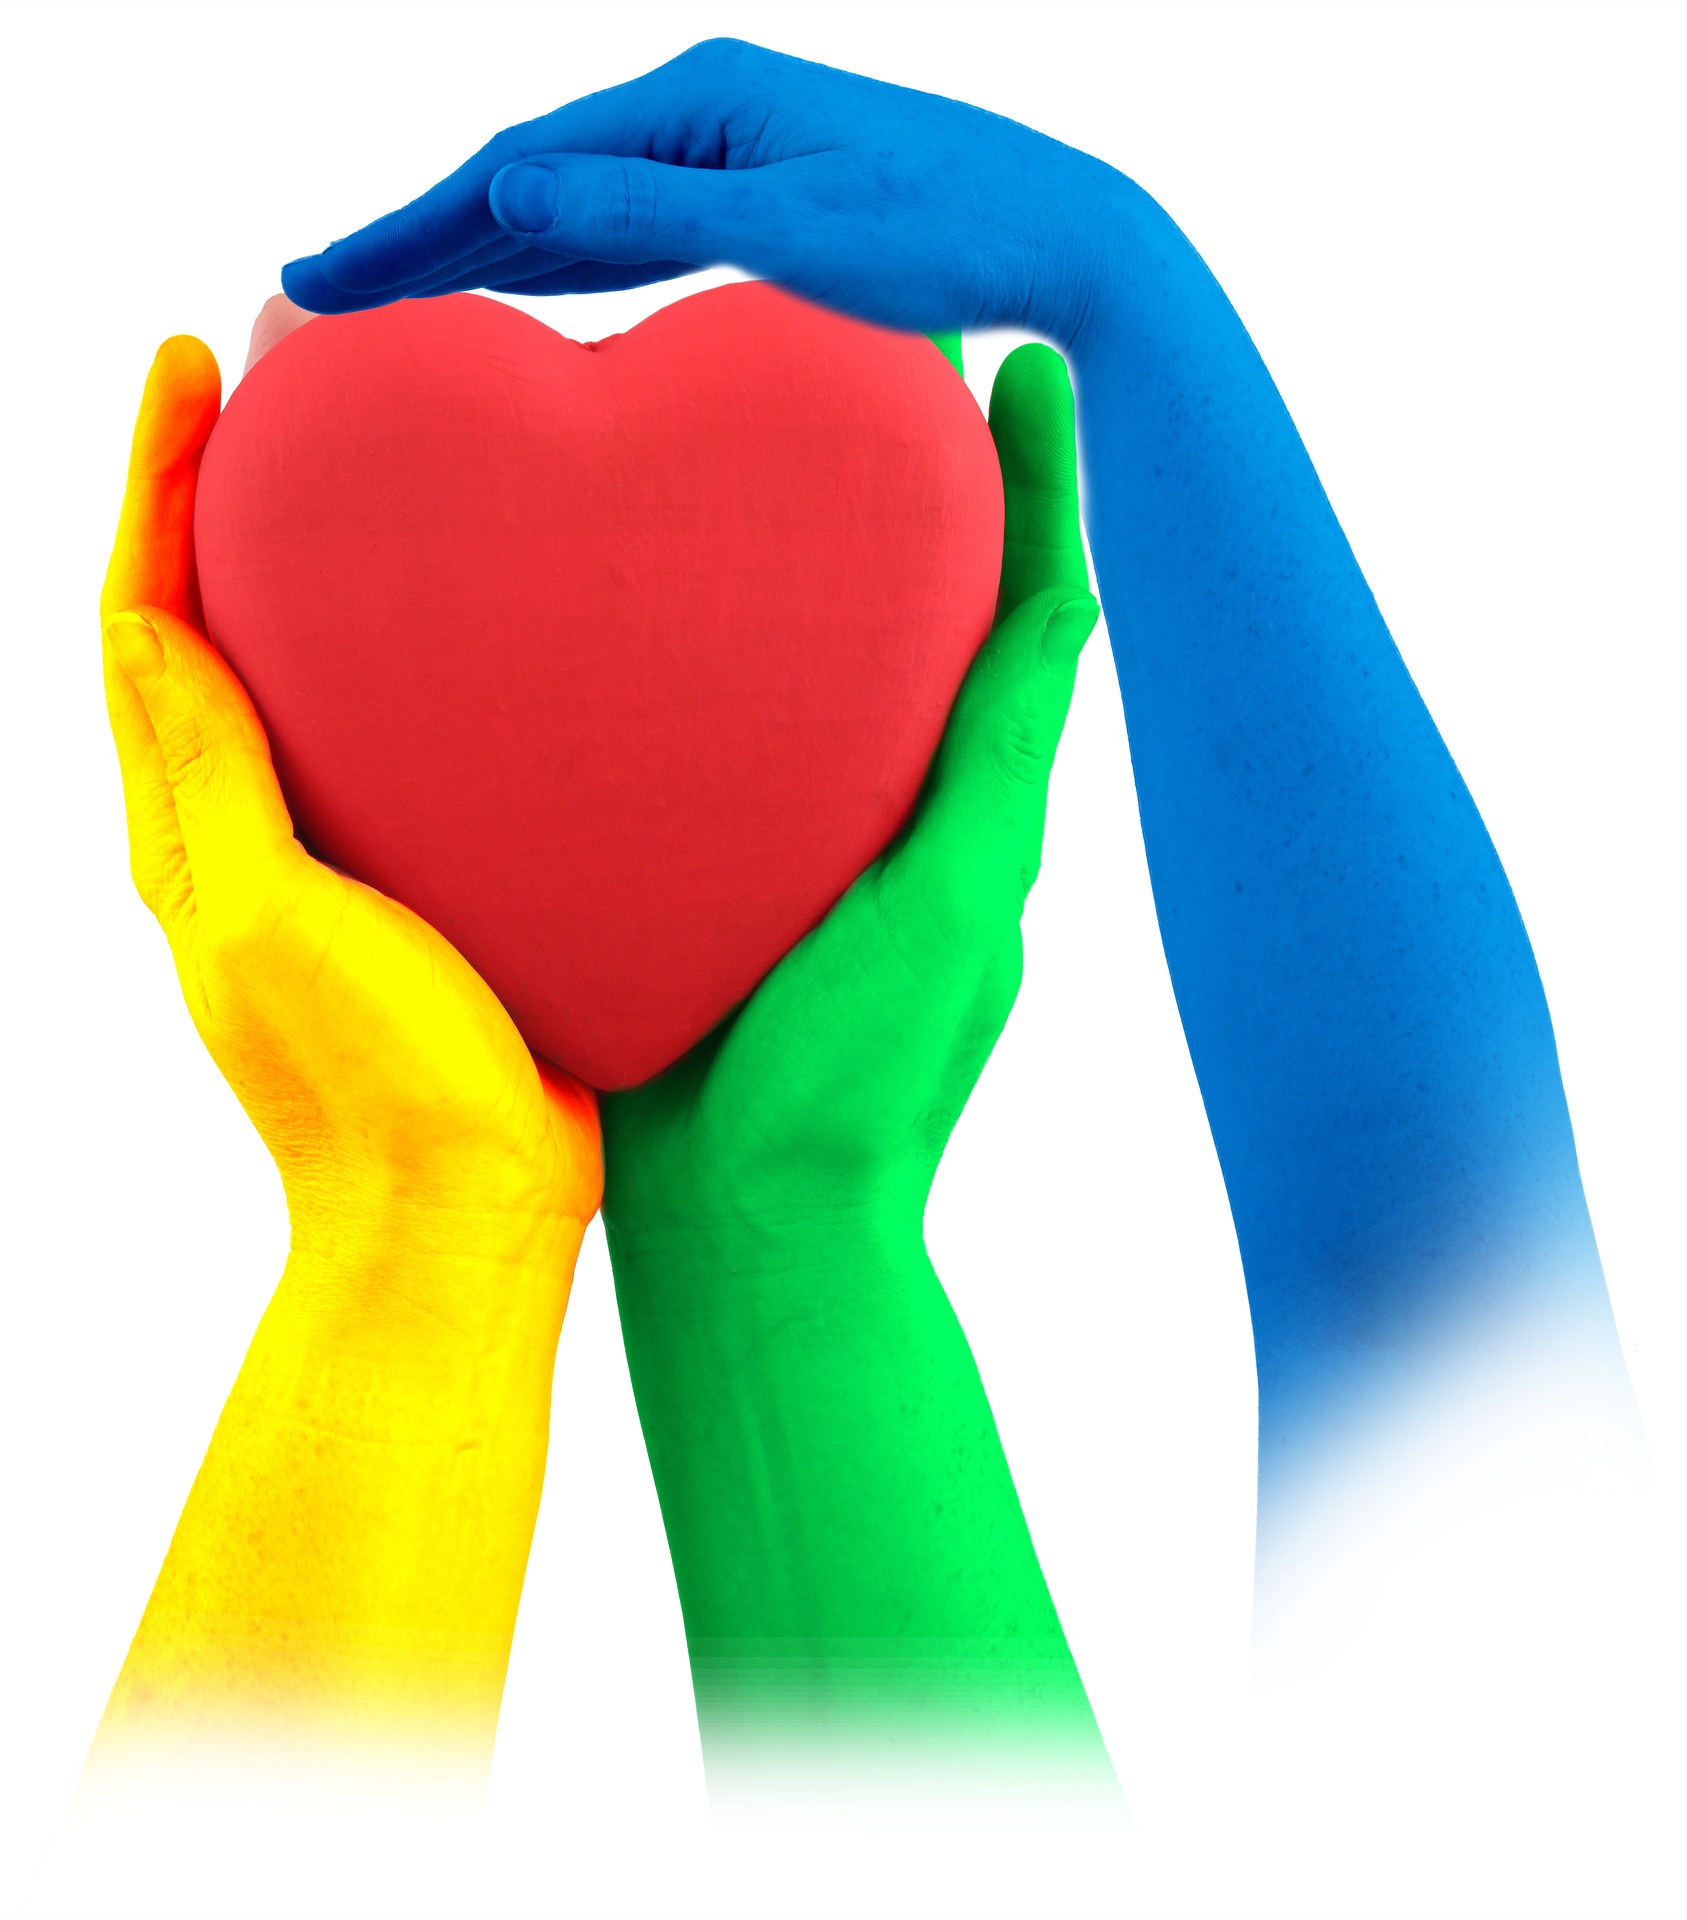 A yellow hand, green hand and blue hand hold a red heart.